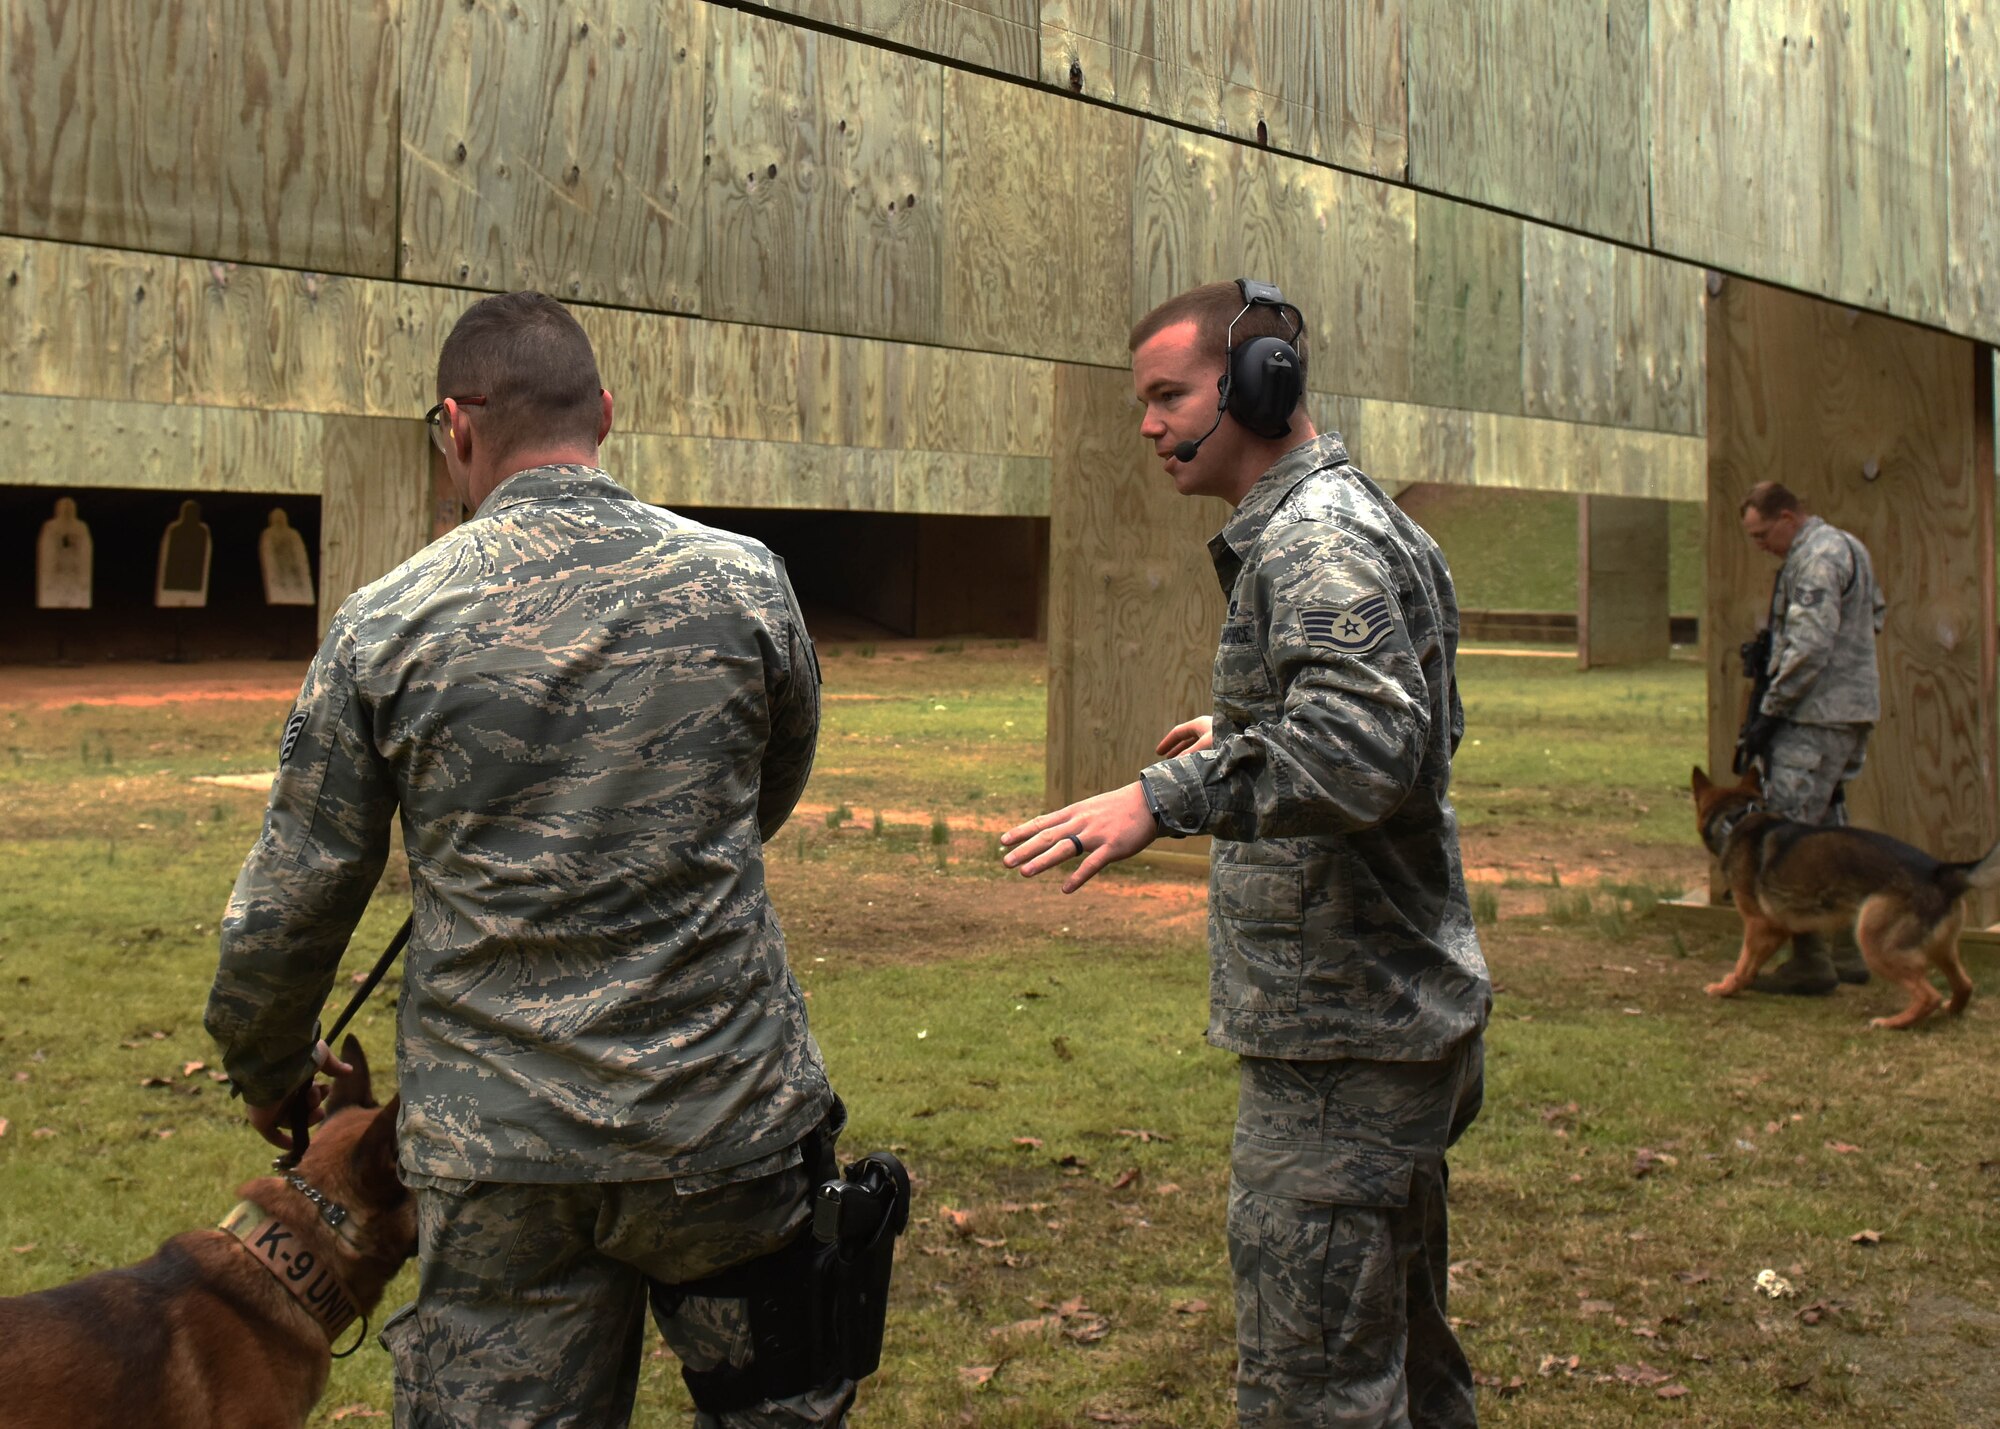 Staff Sgt. Tommy Duncan, right, 19th Security Forces Squadron K9 trainer, advises Staff Sgt. Jake Craig, 19th SFS K9 handler, during gunfire training March 16, 2017, at Little Rock Air Force Base, Ark. Duncan is responsible for administering training for the unit’s dog teams. (U.S. Air Force photo by Senior Airman Mercedes Taylor) 